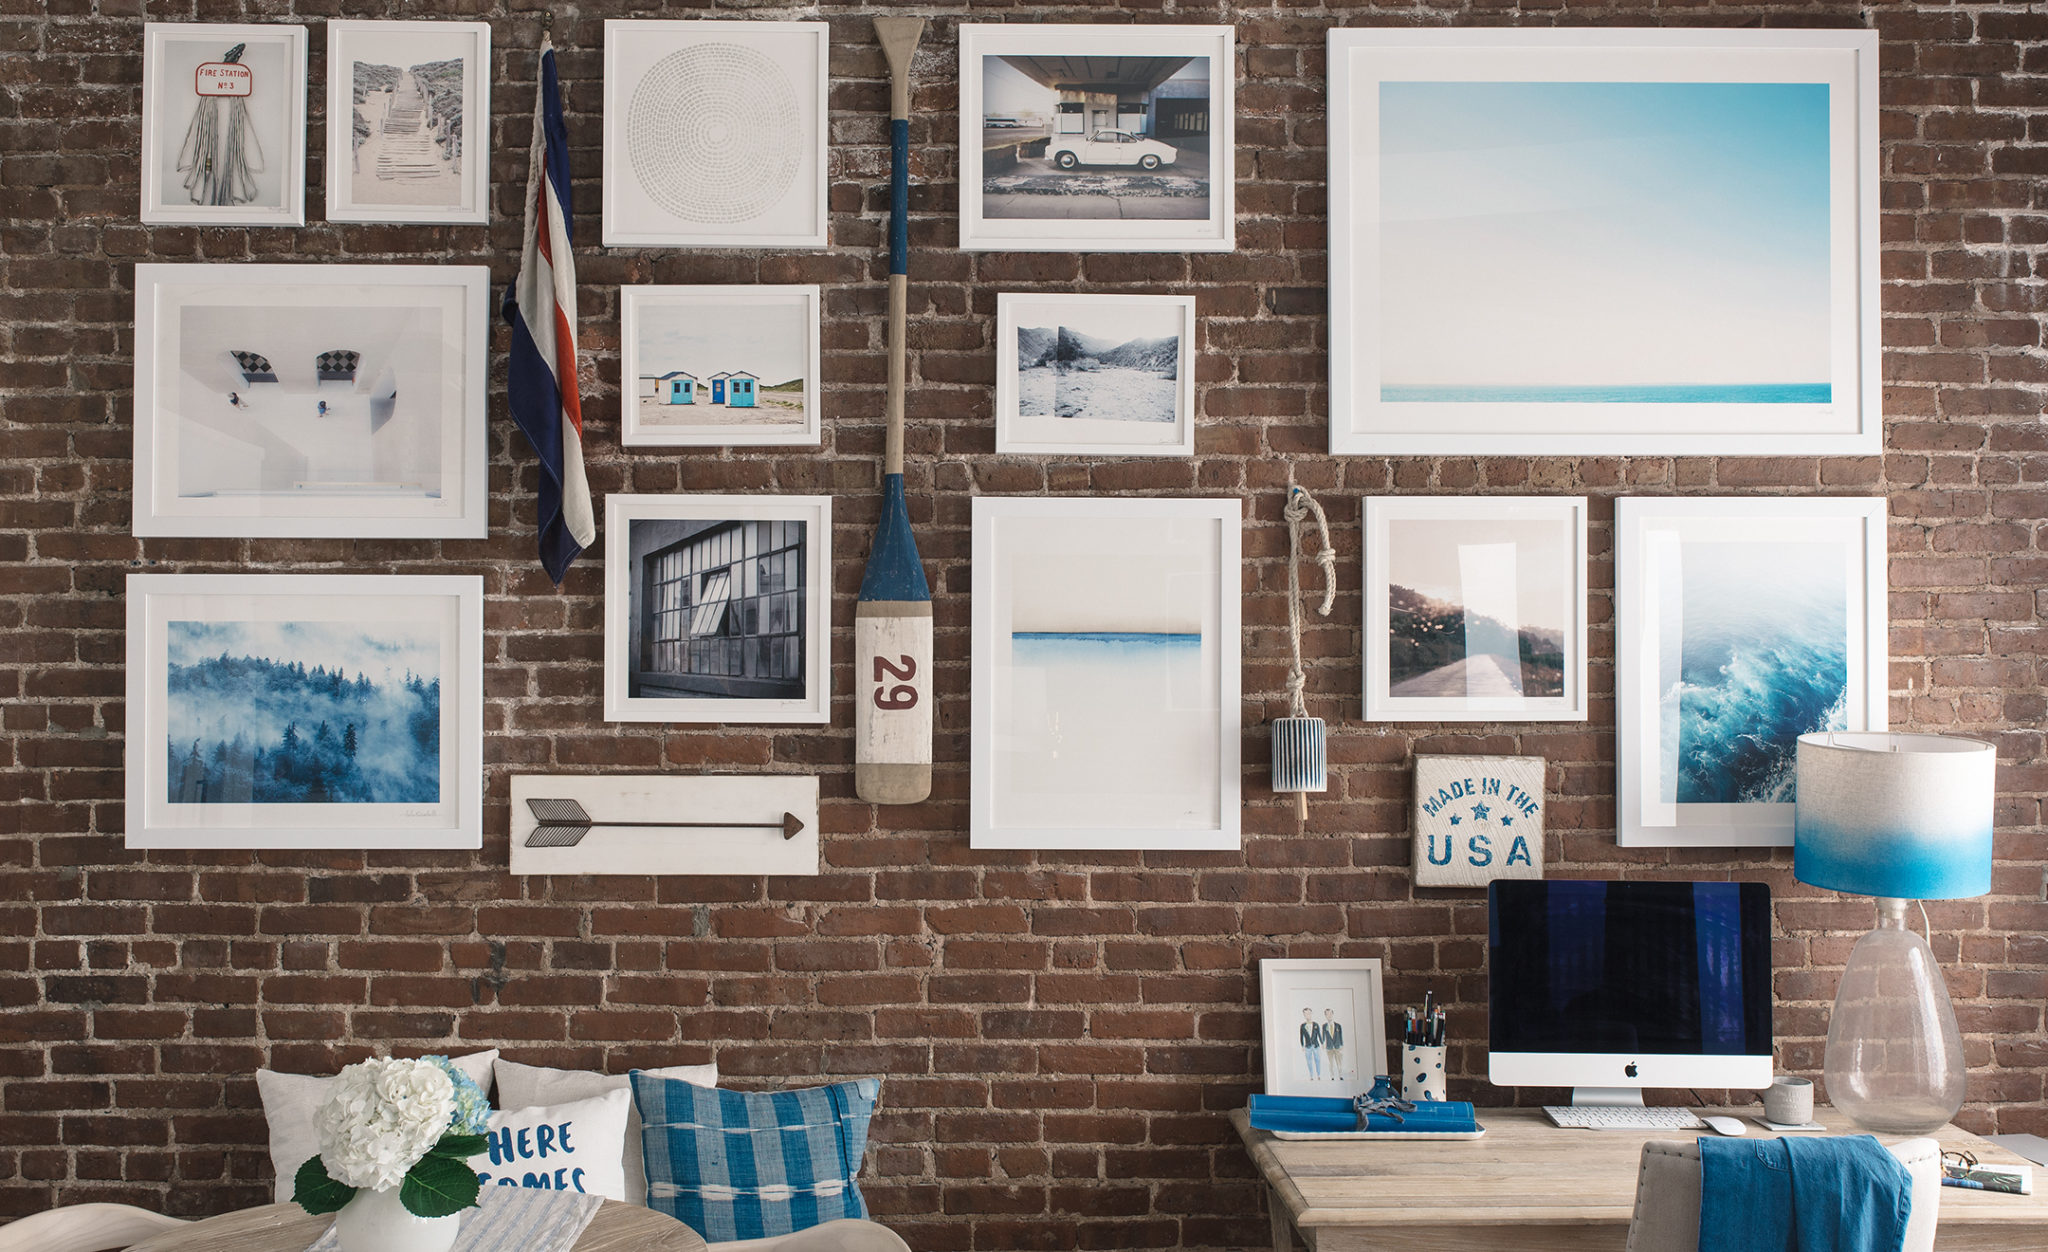 How to Hang A Gallery Wall on Exposed Brick Walls